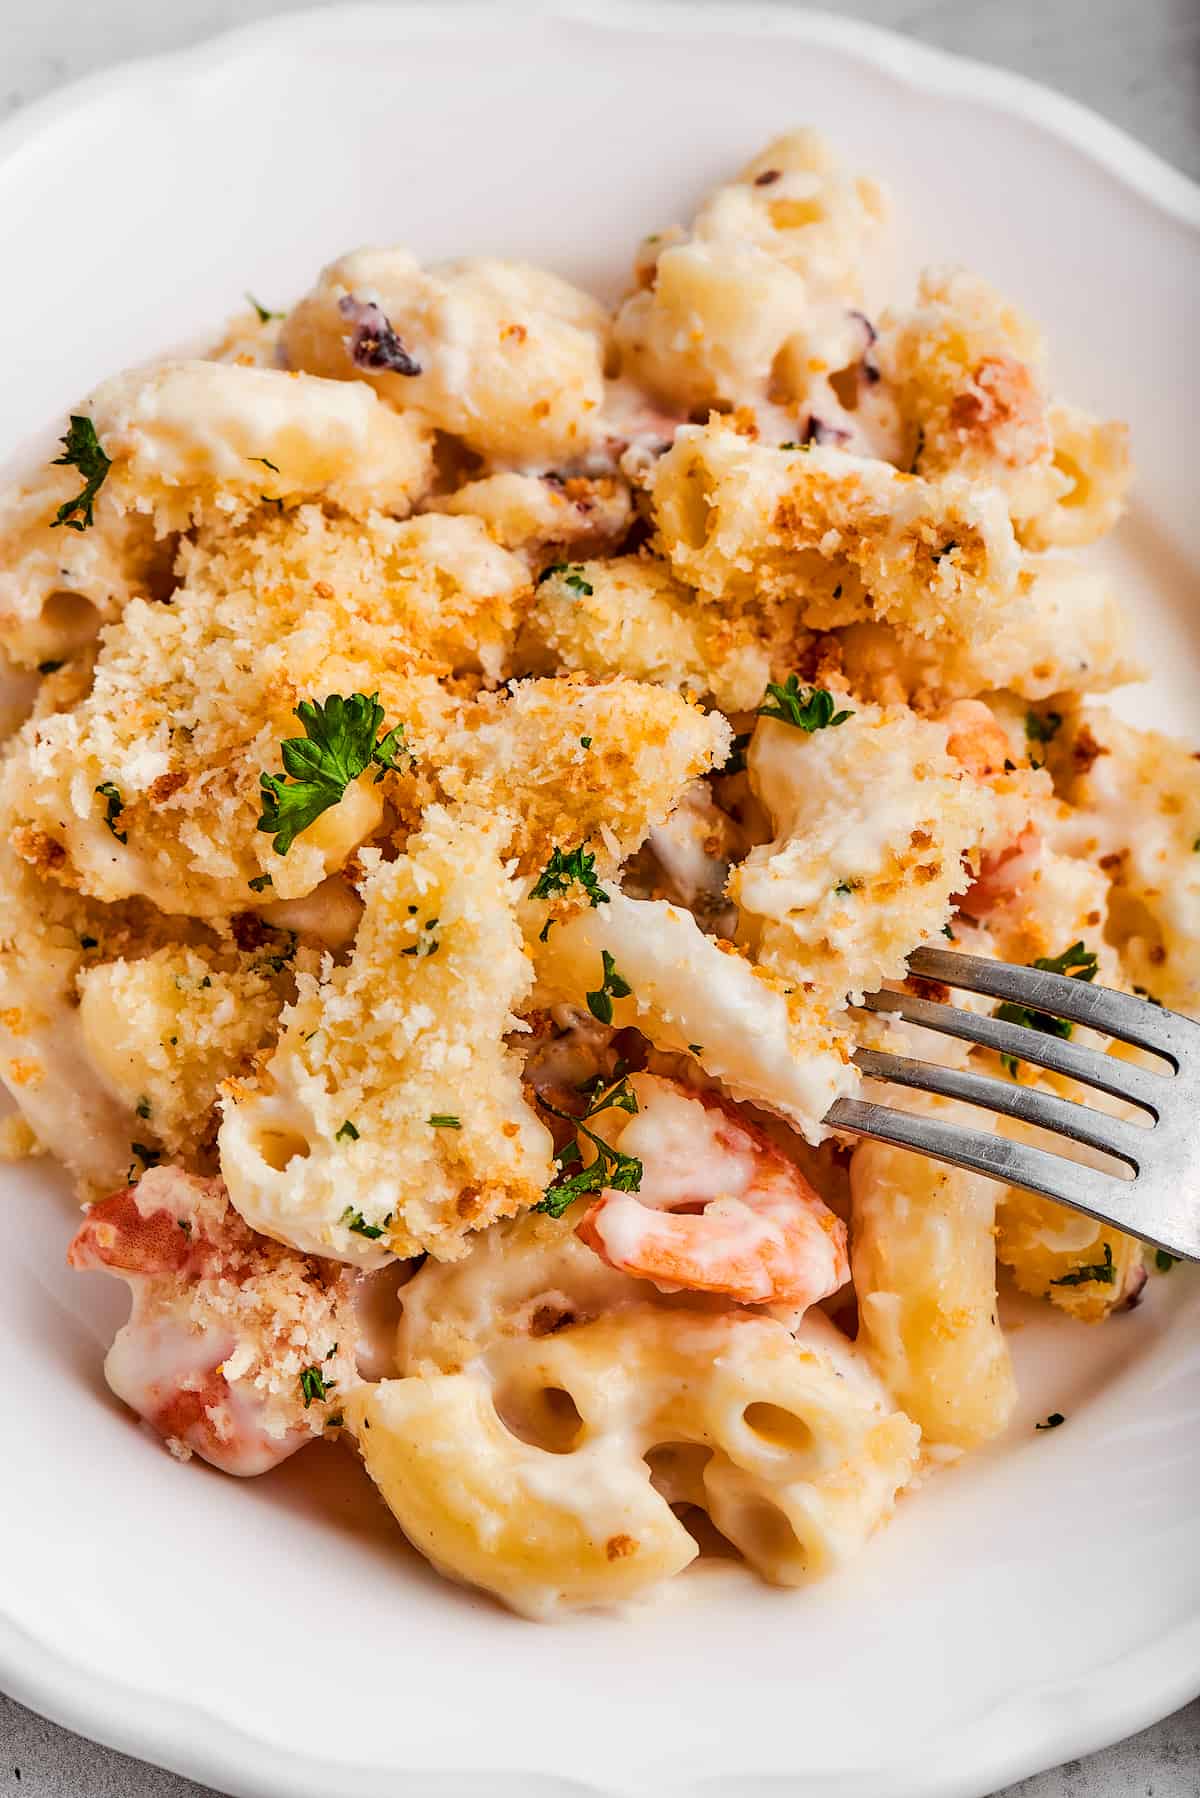 Taking a bite of seafood mac and cheese